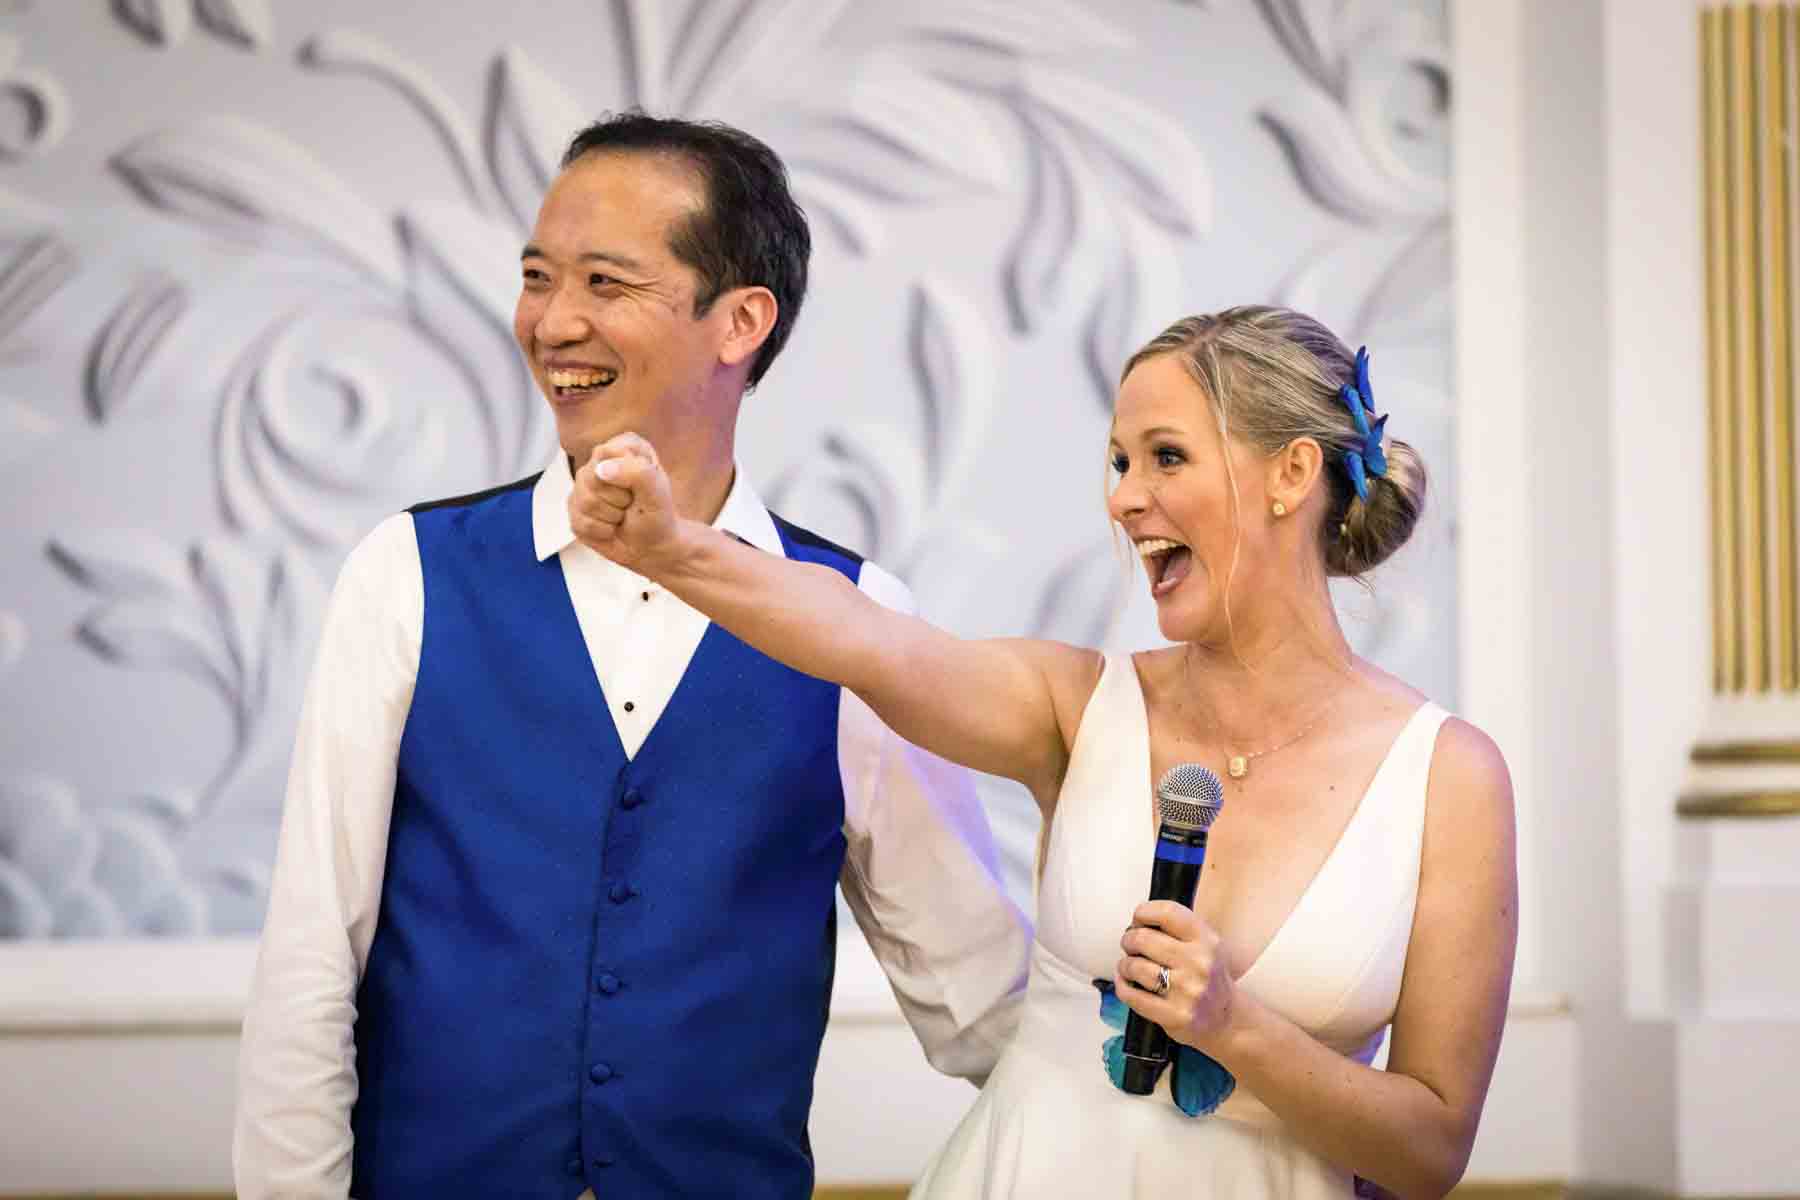 Bride holding microphone with fist raised beside groom wearing blue vest